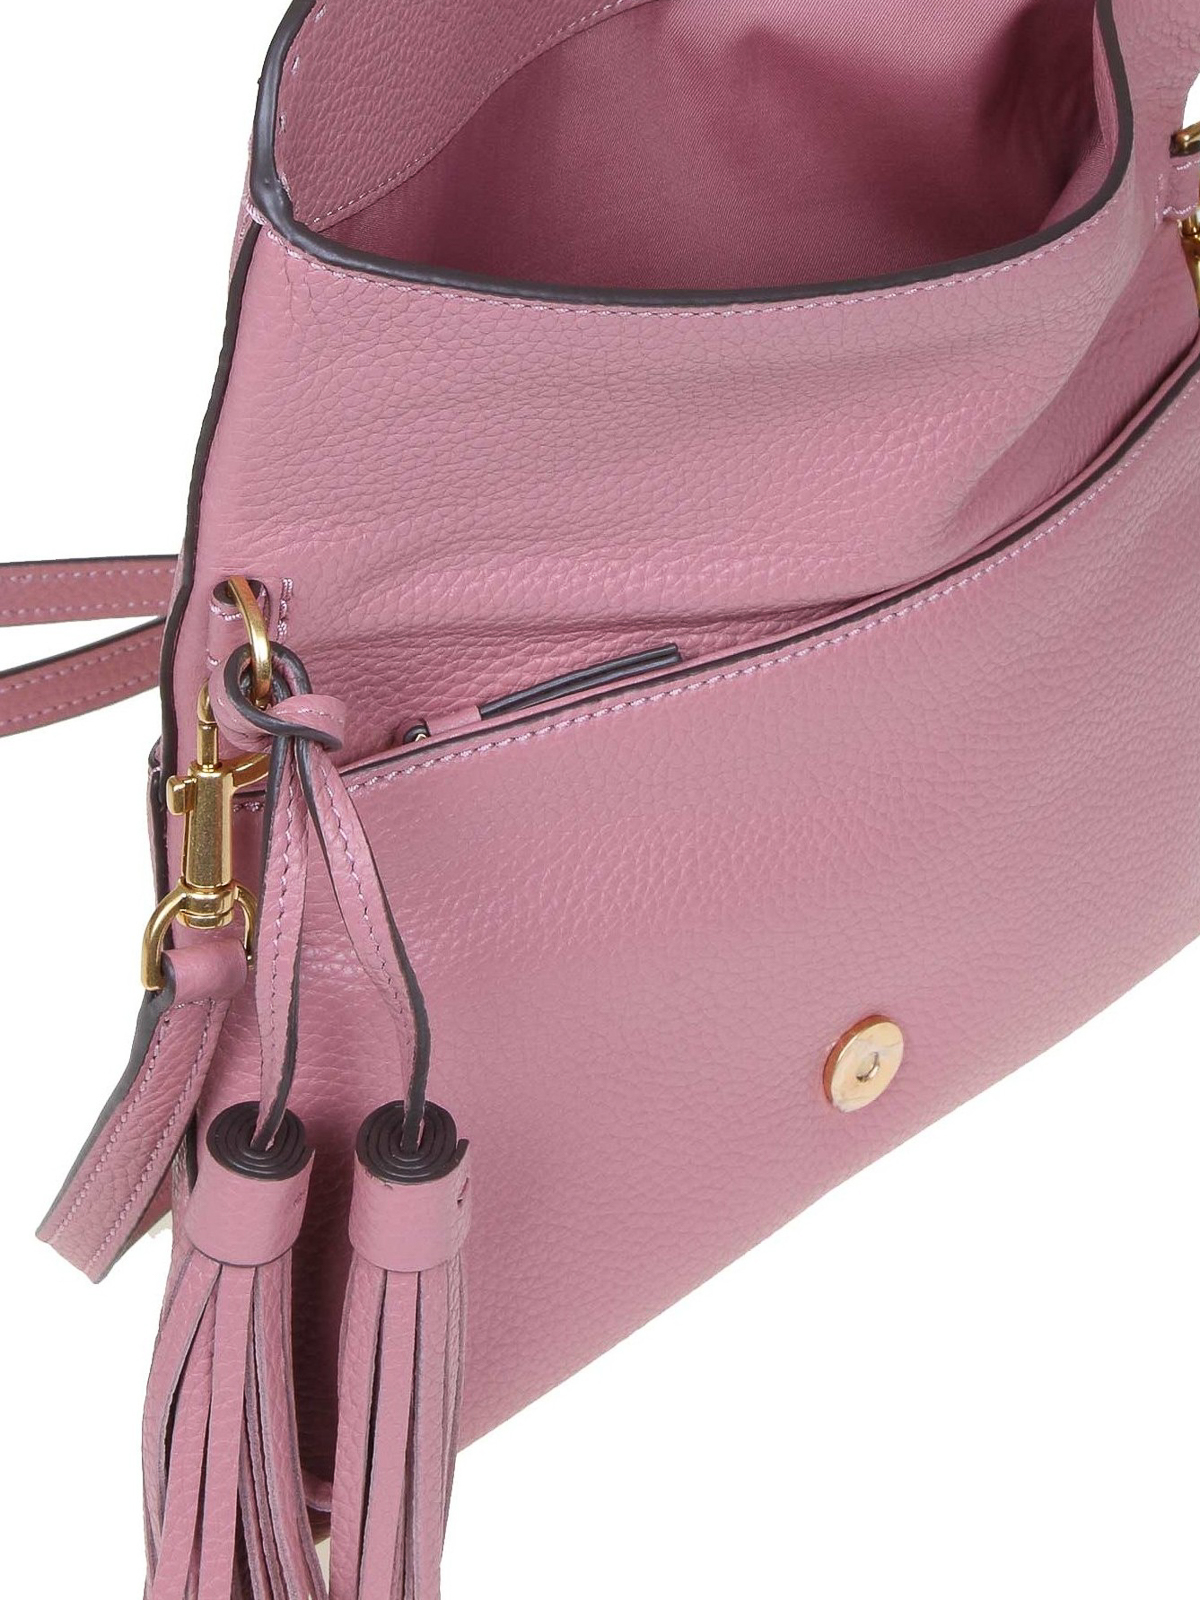 Shoulder bags Tory Burch - McGraw fold-over pink leather bag - 53163651